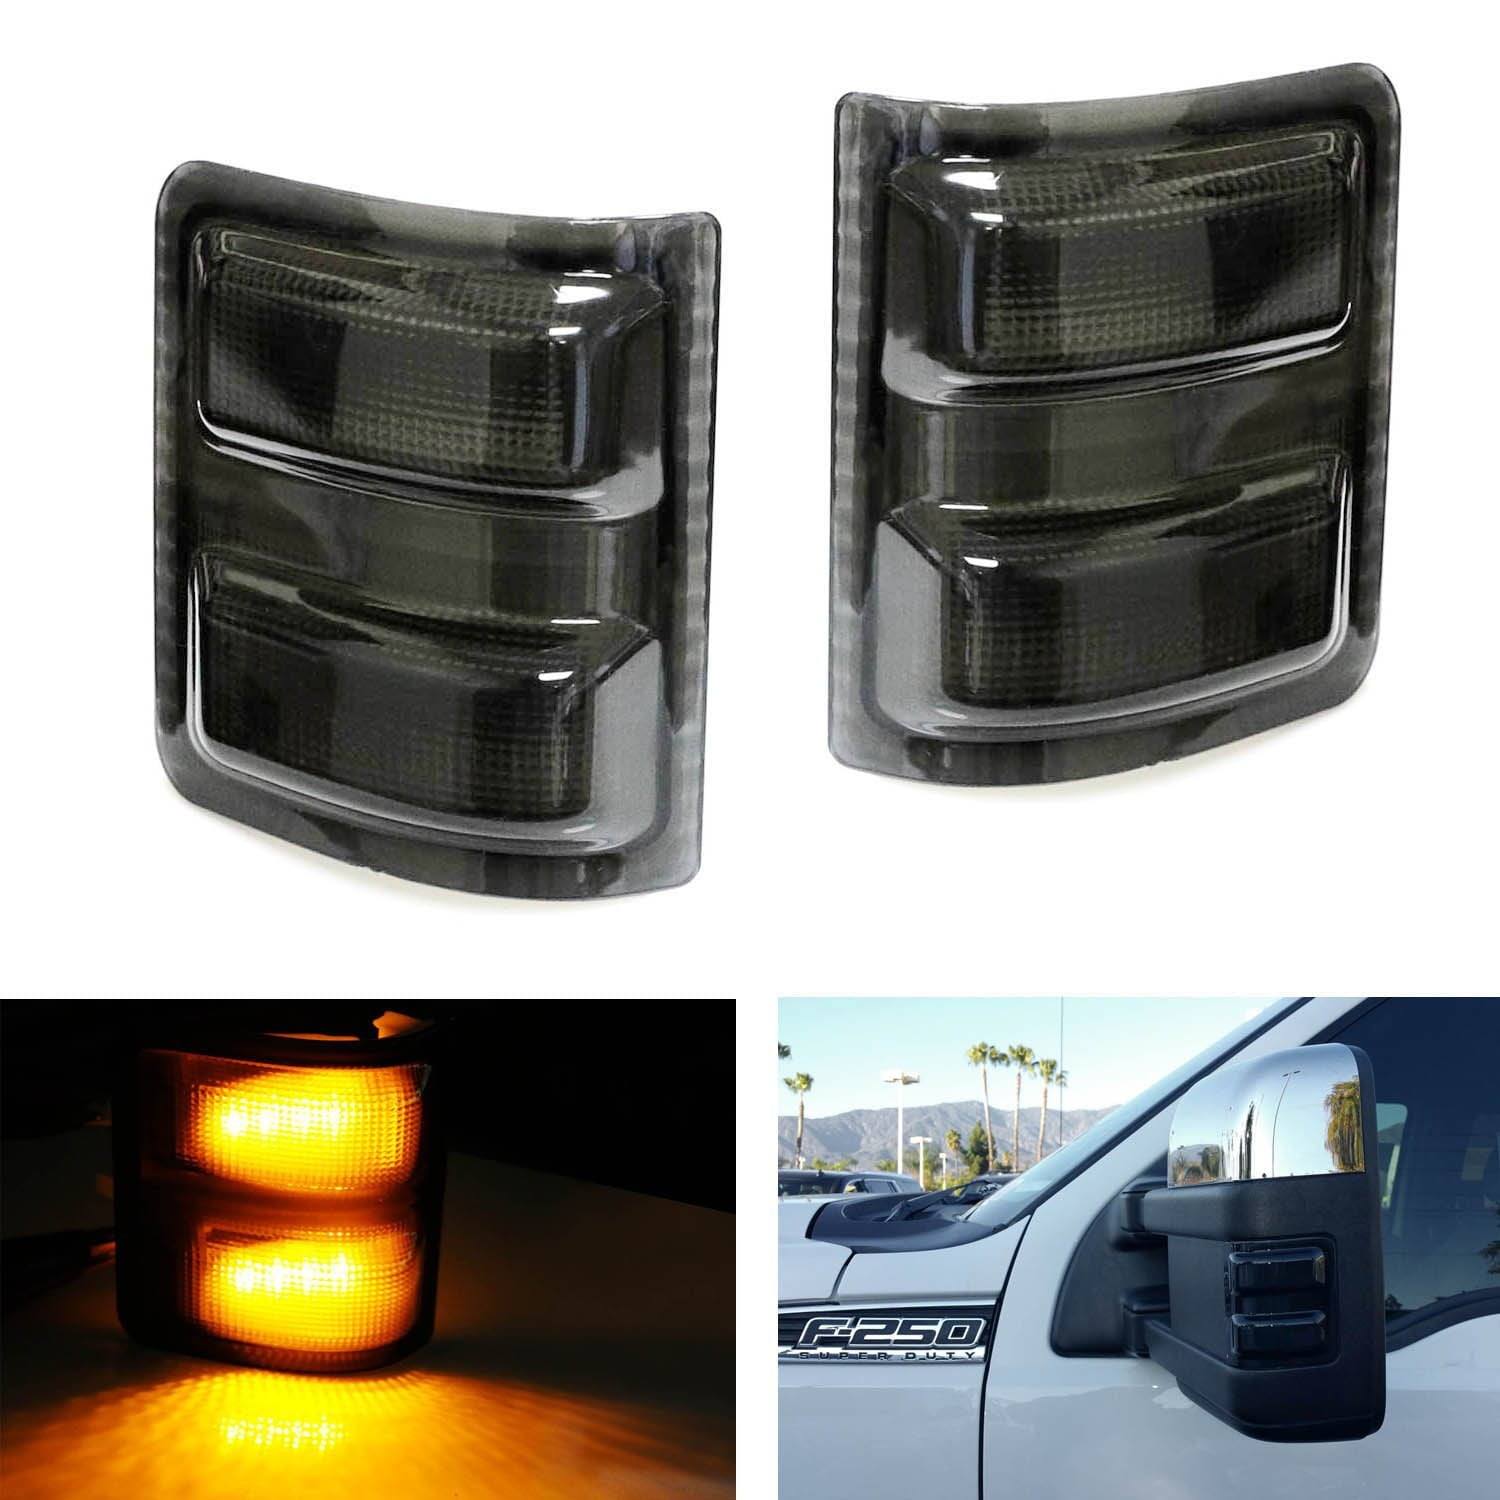 Smoked lens-Yellow 2x Amber LED Side Mirror Marker Signal Lights Lamp Smoked Lens For Ford F-250 F-350 F-450 F-550 Ford Super duty 2008 2009 2010 2011 2012 2013 2014 2015 2016 